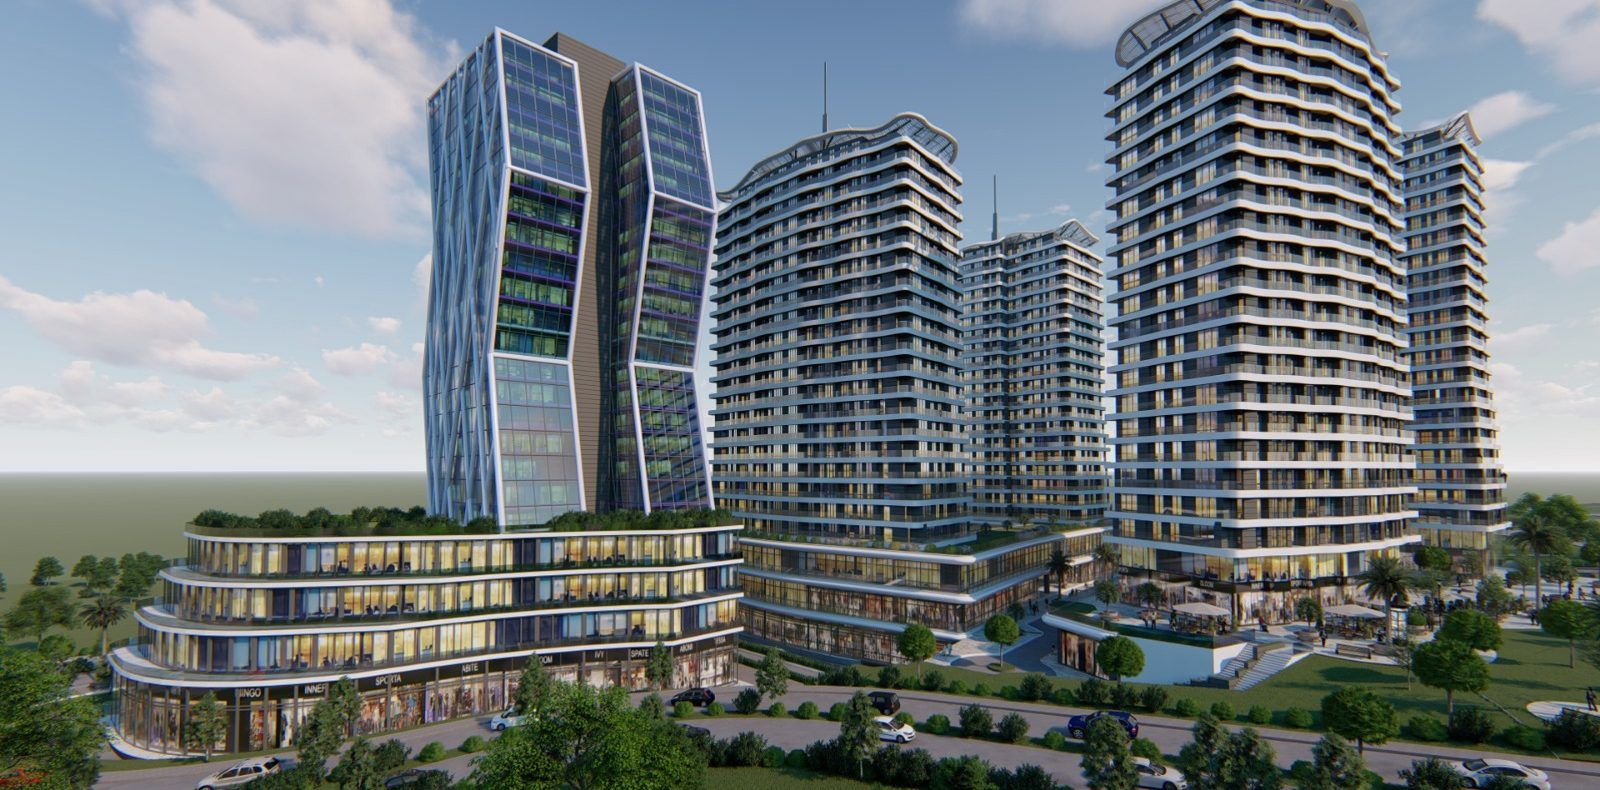 investment in Turkish real estate